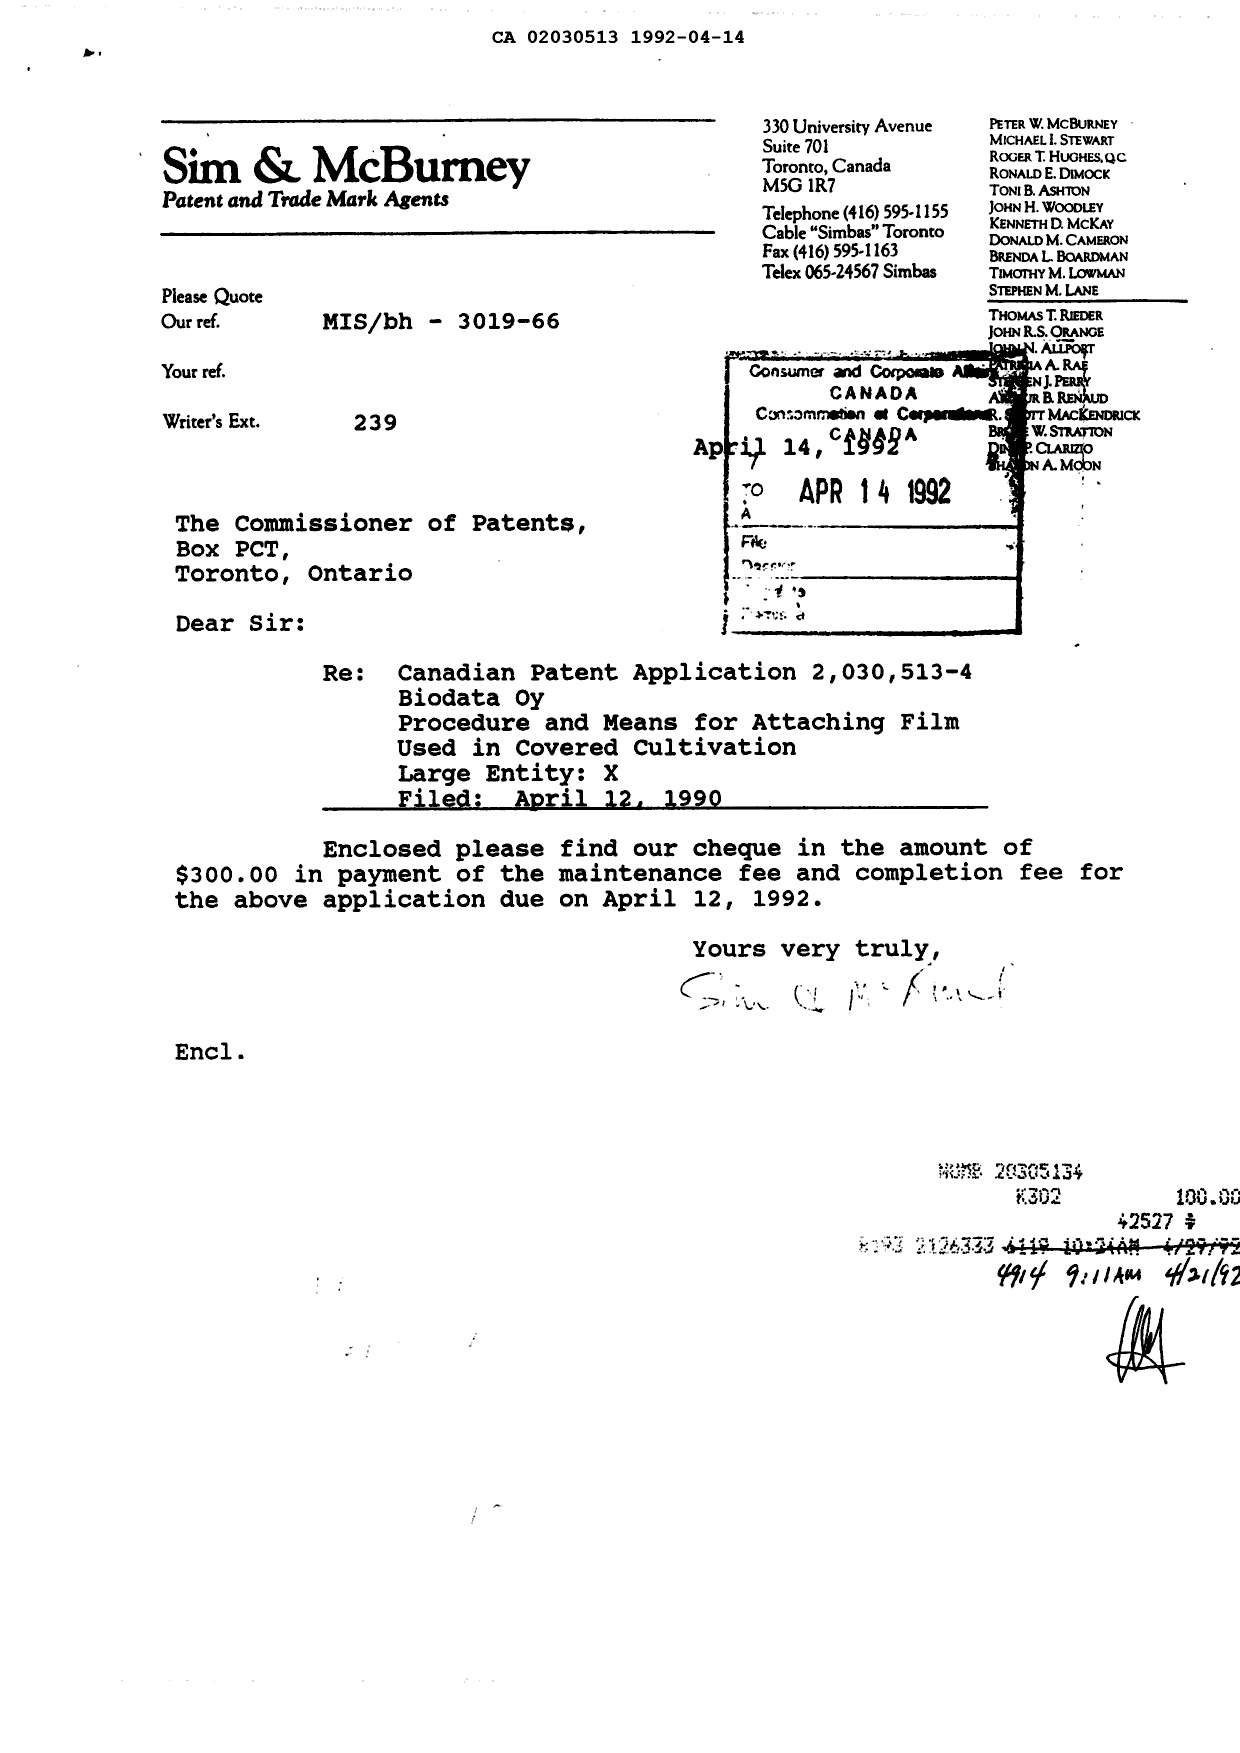 Canadian Patent Document 2030513. Fees 19920414. Image 2 of 3